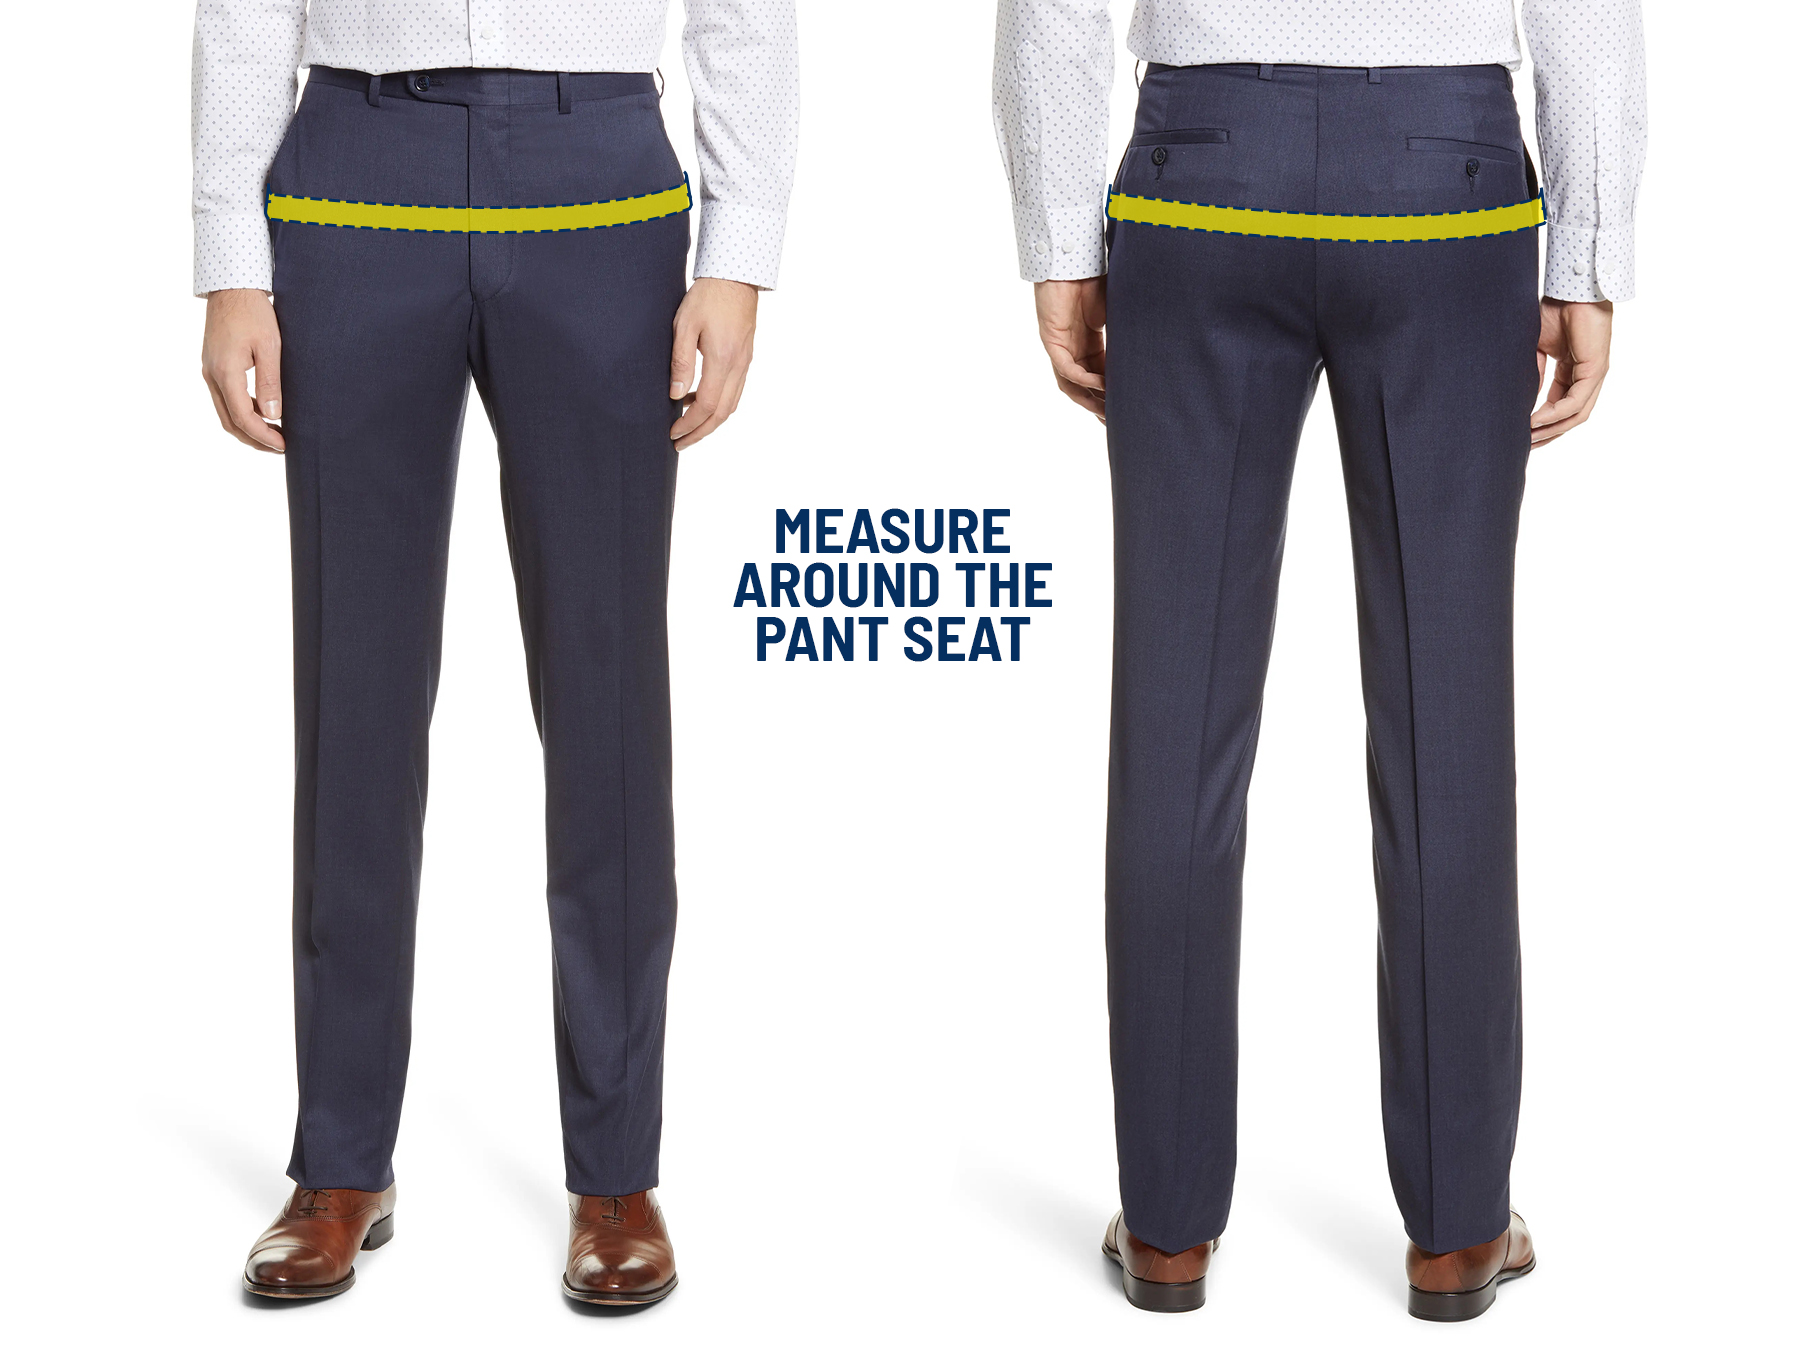 Measure the pants around the pant seat